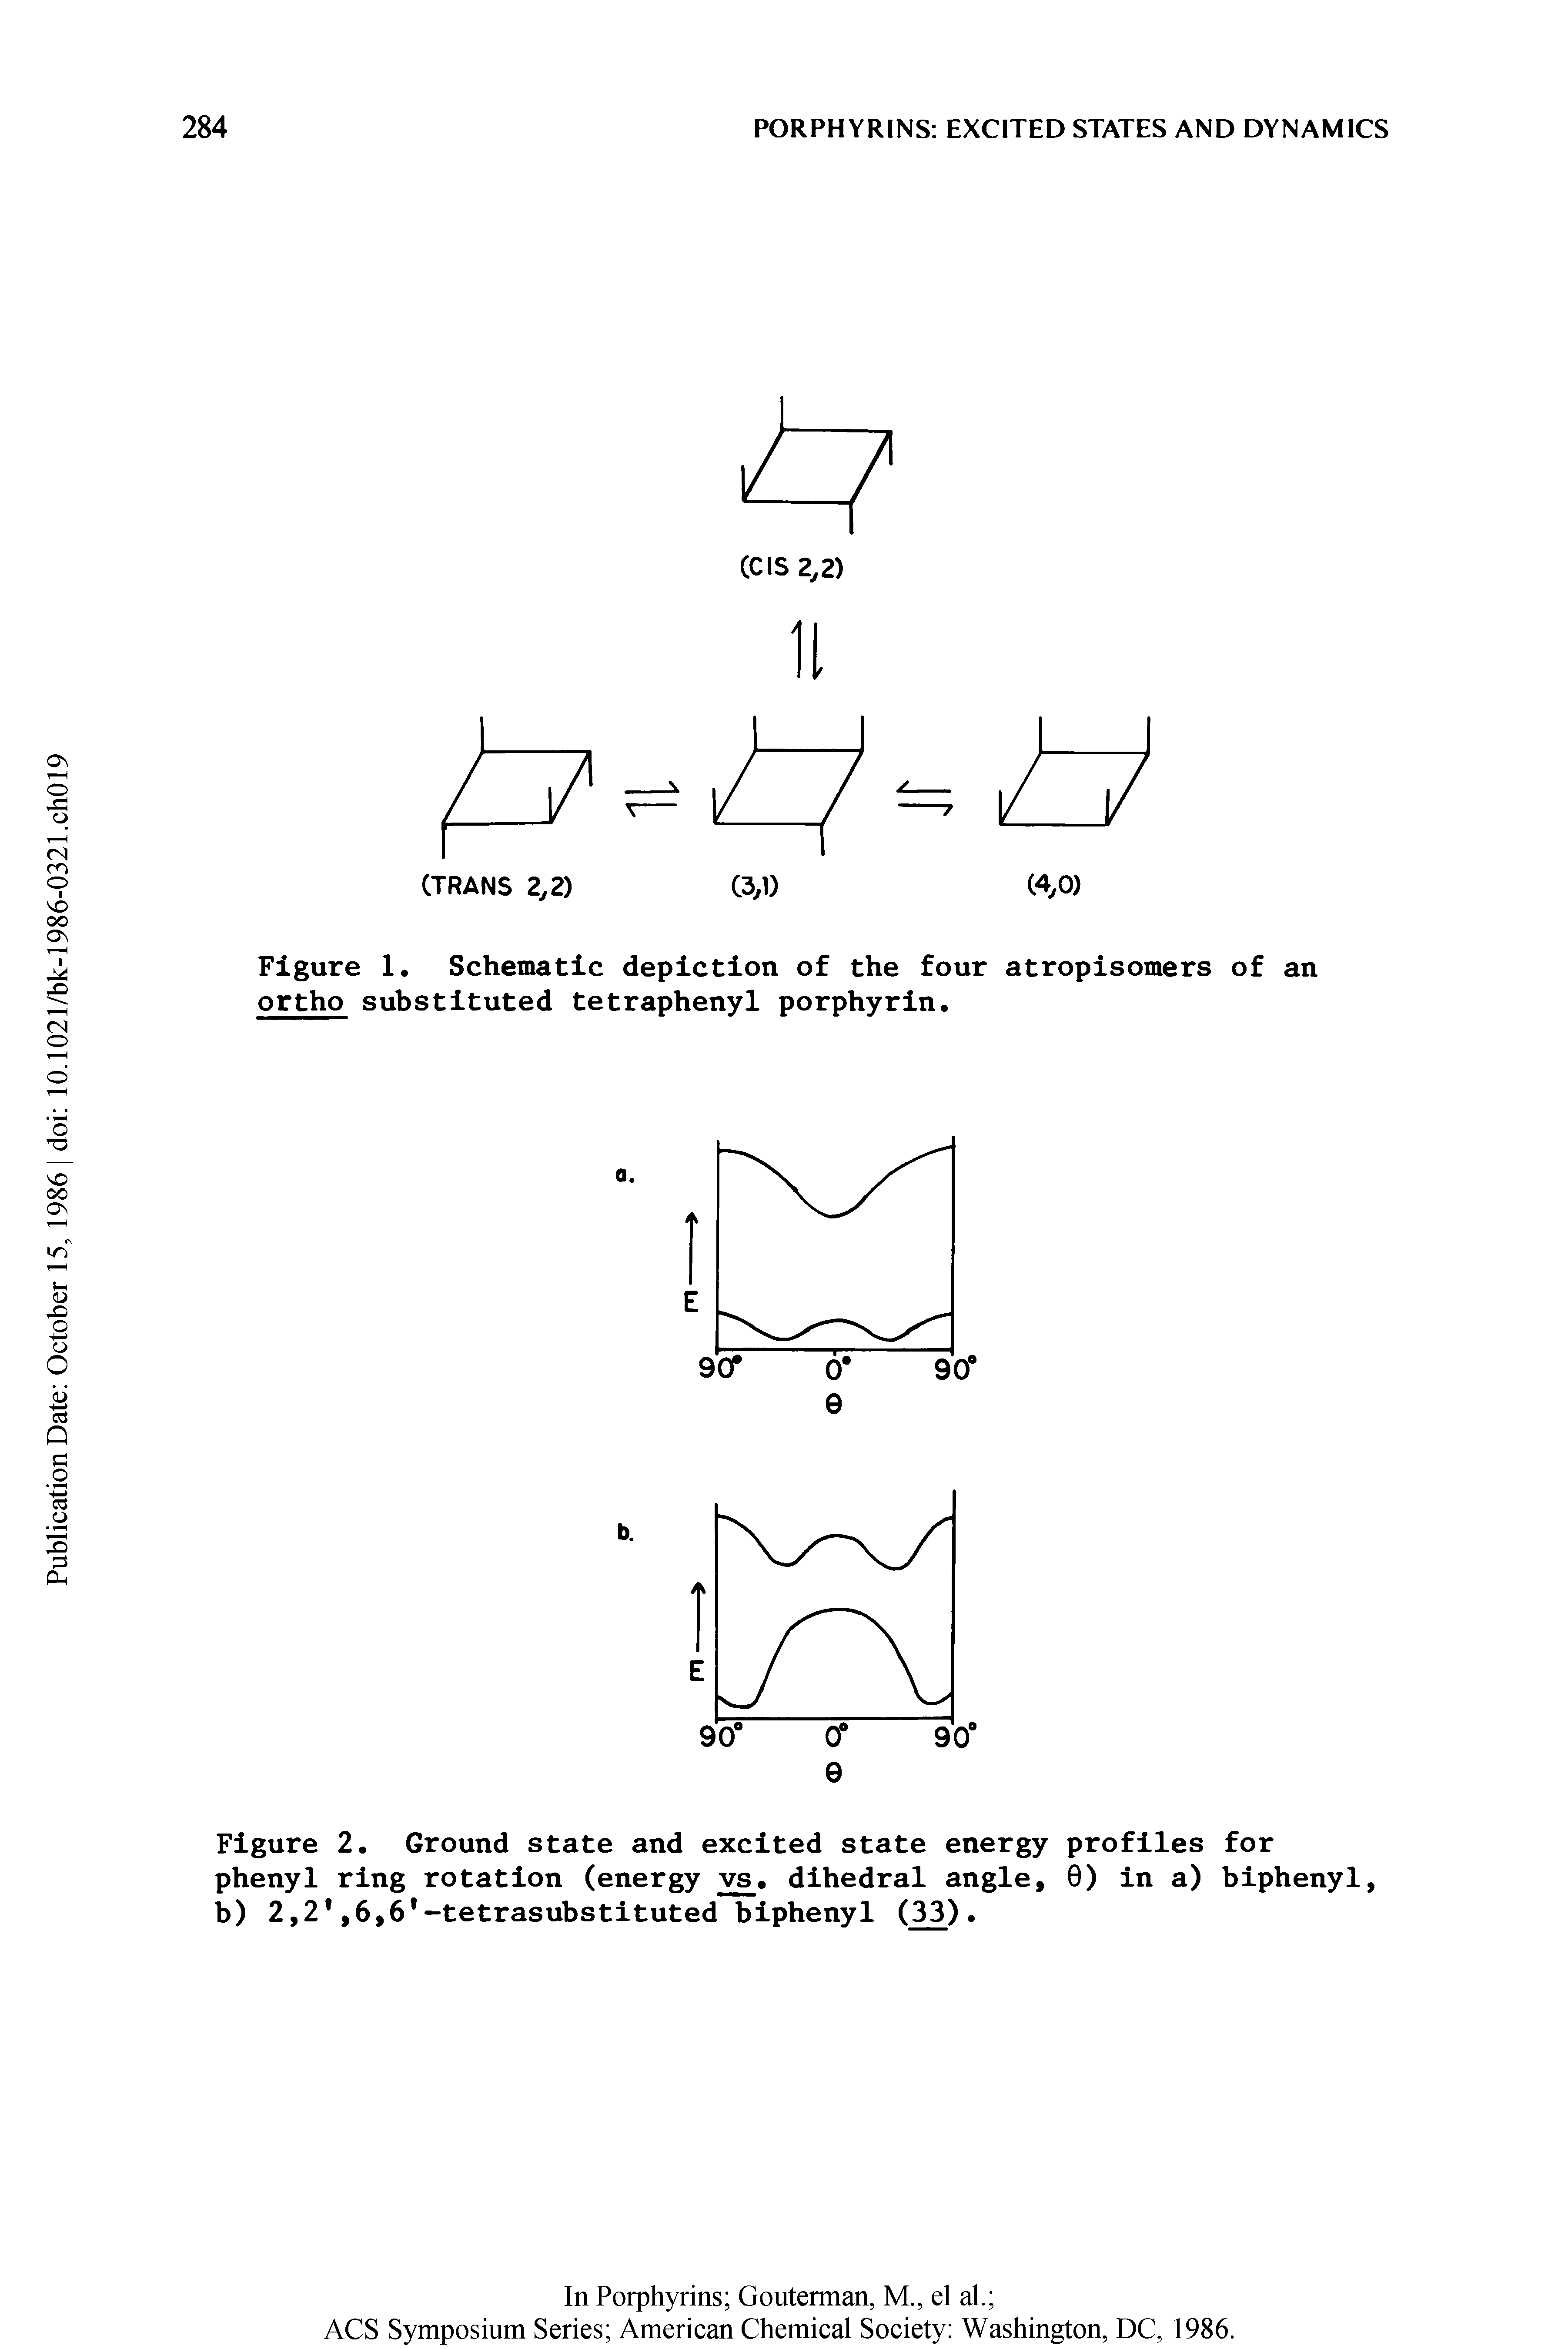 Figure 2. Ground state and excited state energy profiles for phenyl ring rotation (energy vs. dihedral angle, 9) in a) biphenyl, b) 2,2, 6,6 -tetrasubstituted biphenyl (33).